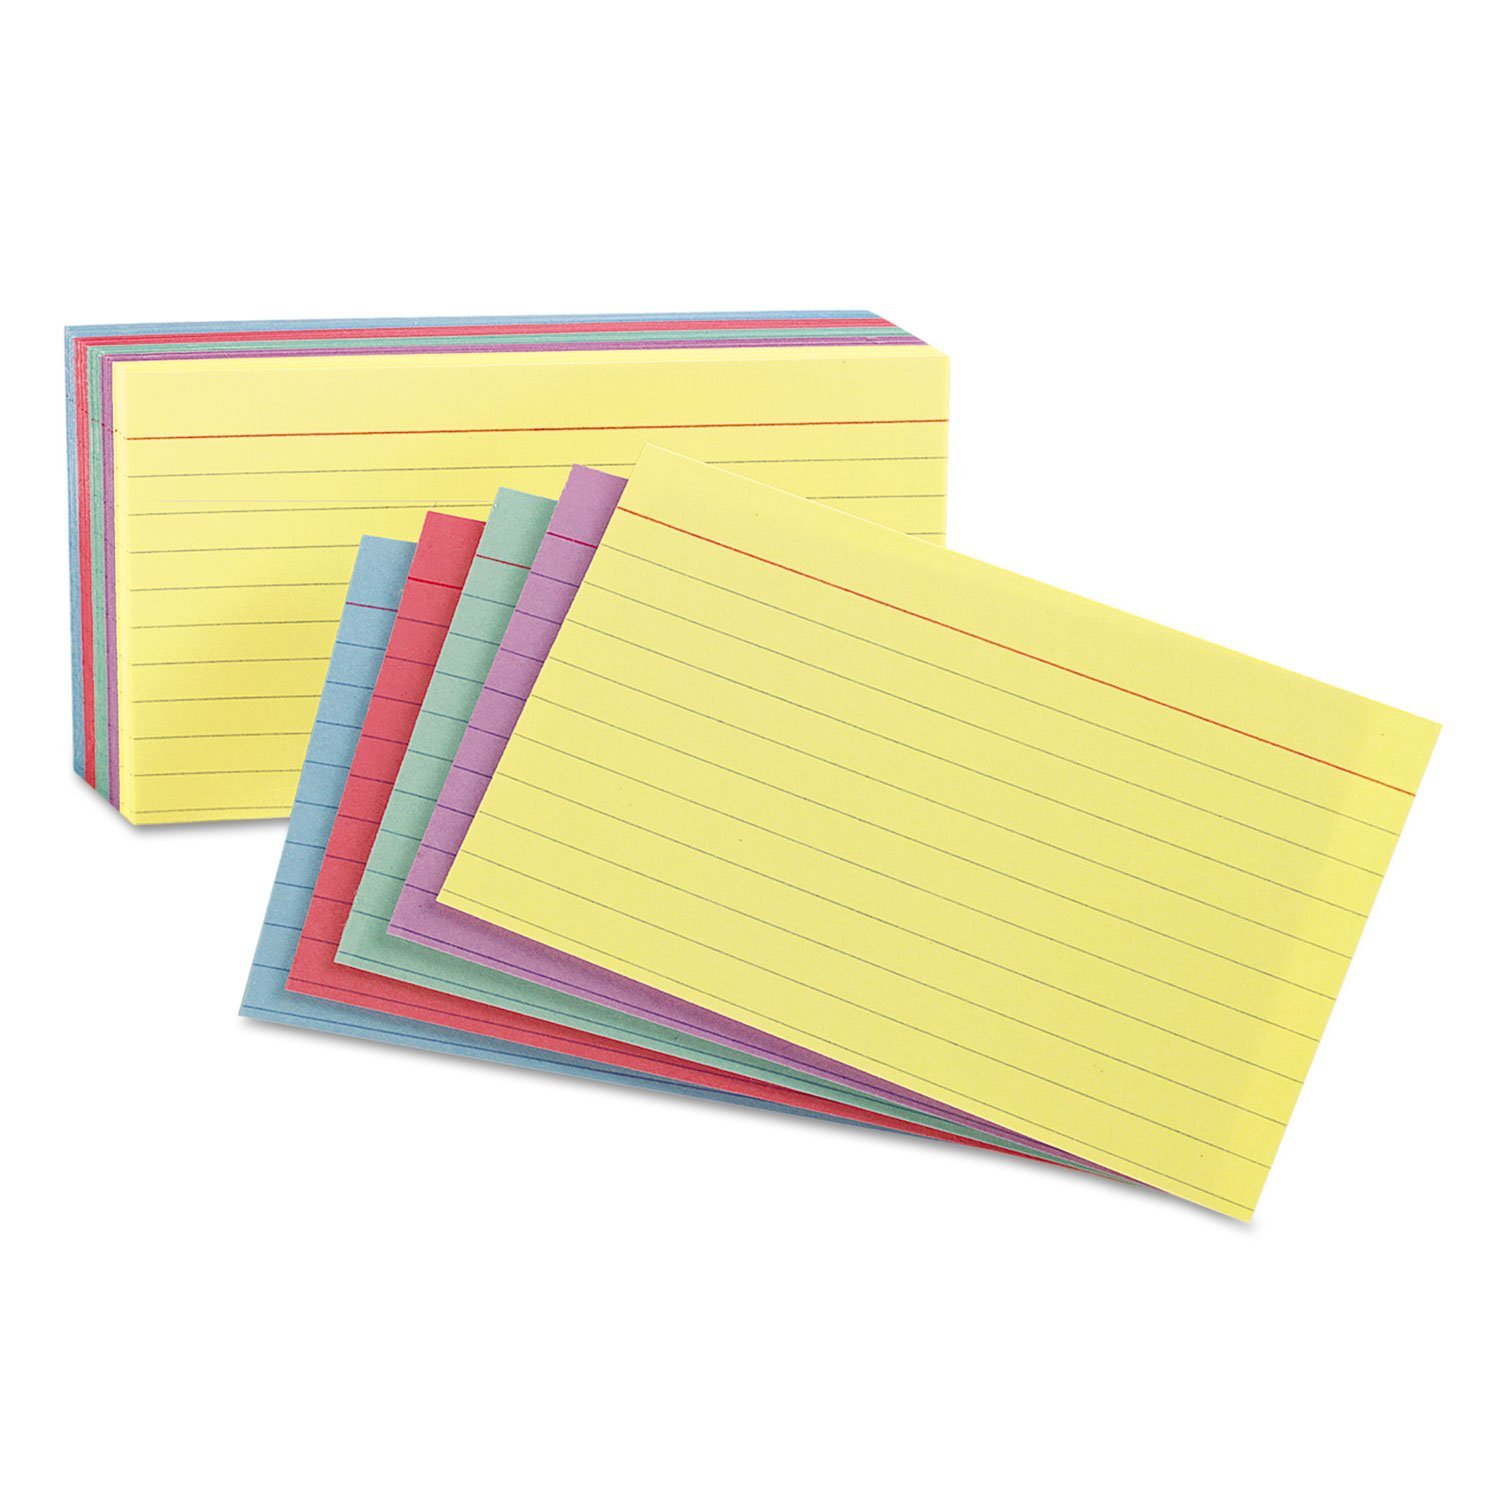 3 X 5 Index Cards, Ruled - Assorted Colors - 100/Pkg